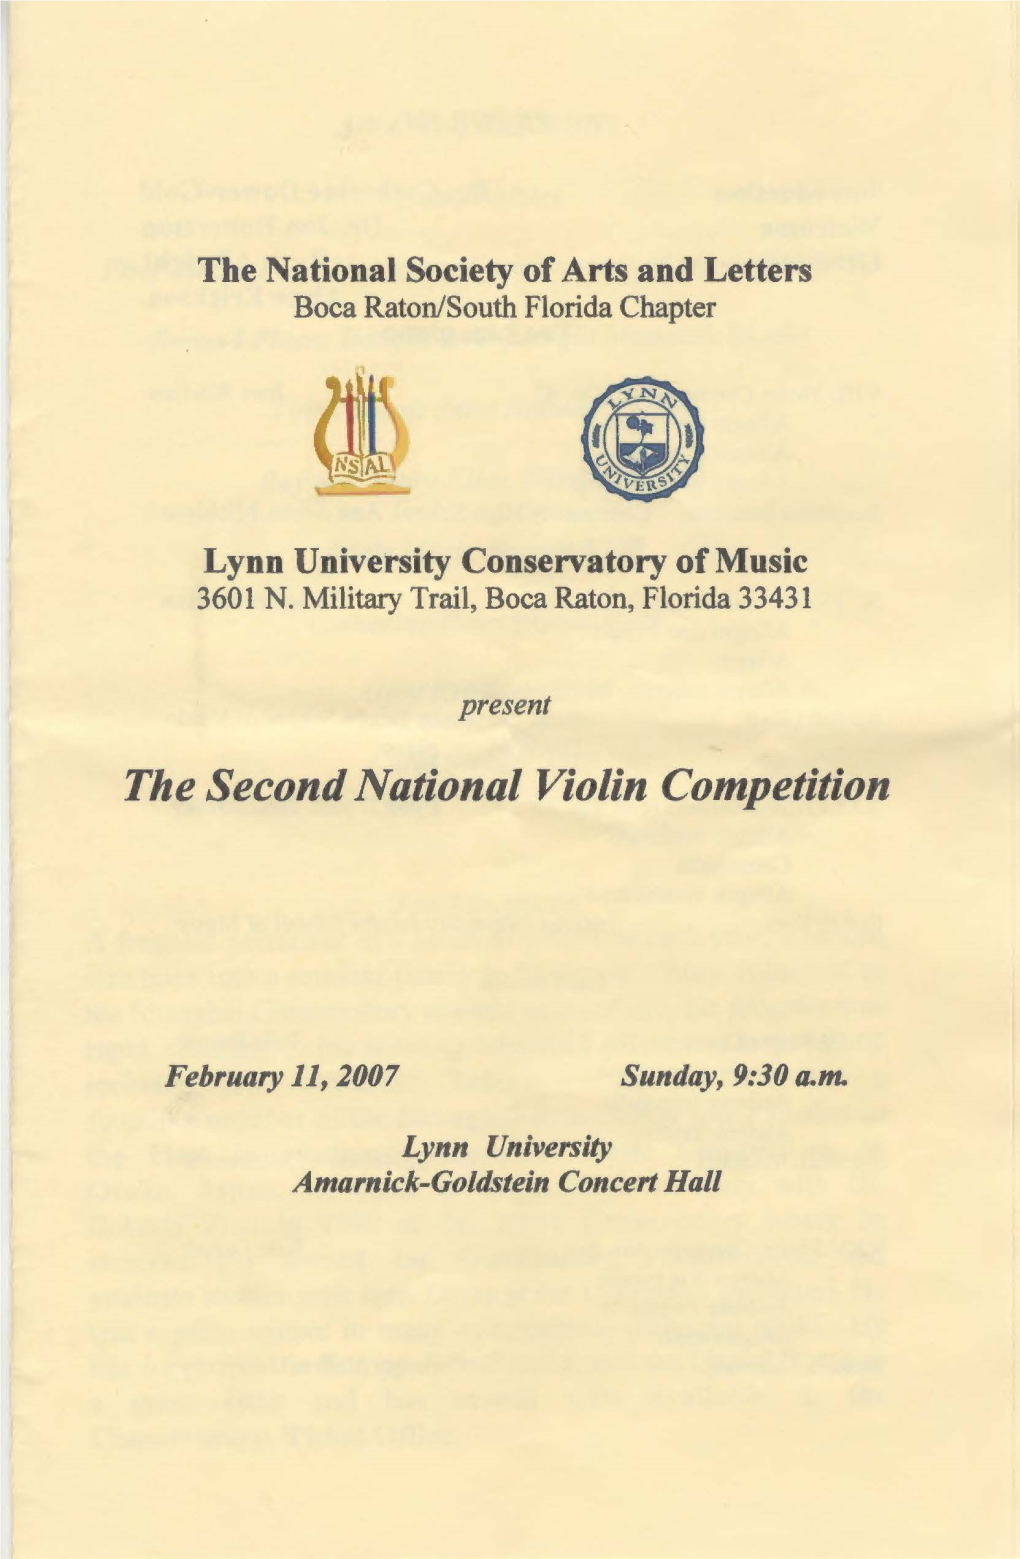 The Second National Violin Competition